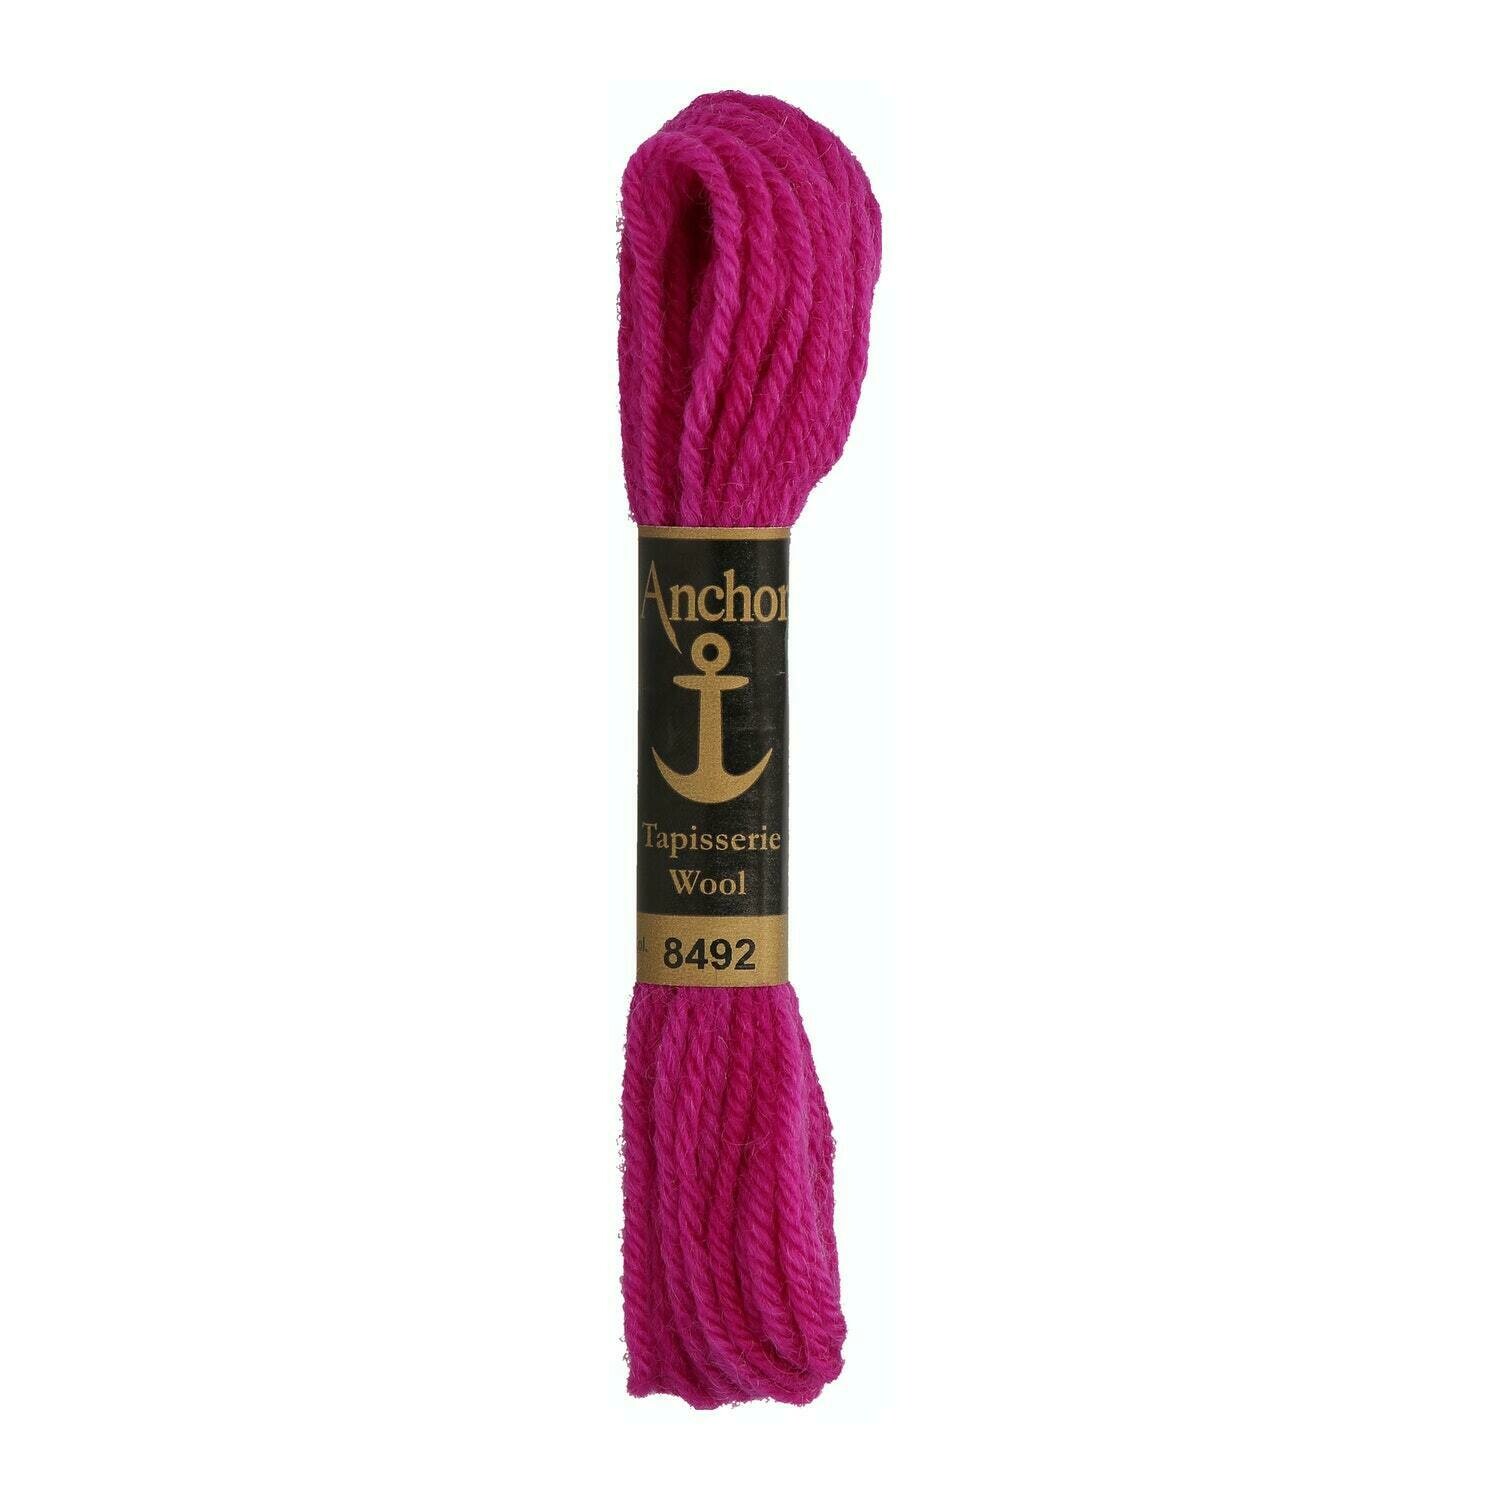 Anchor Tapisserie Wool #08492